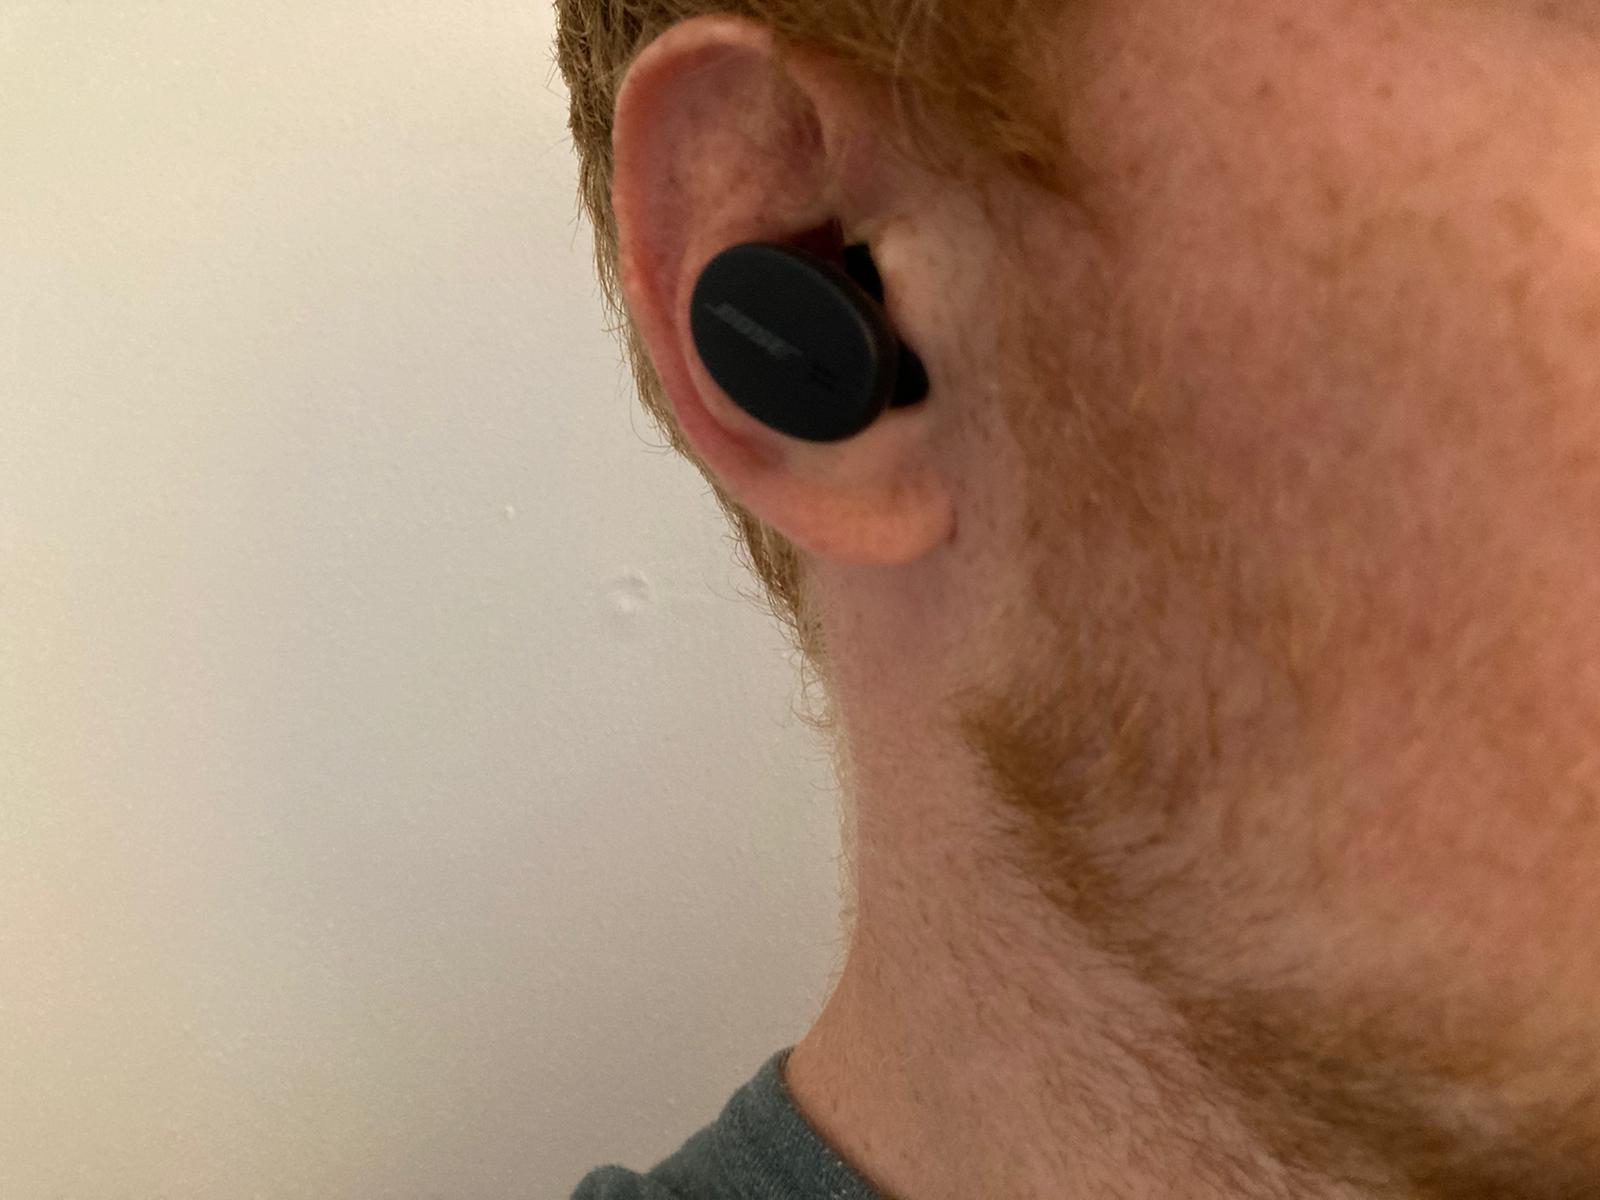 The Bose Sport earbuds